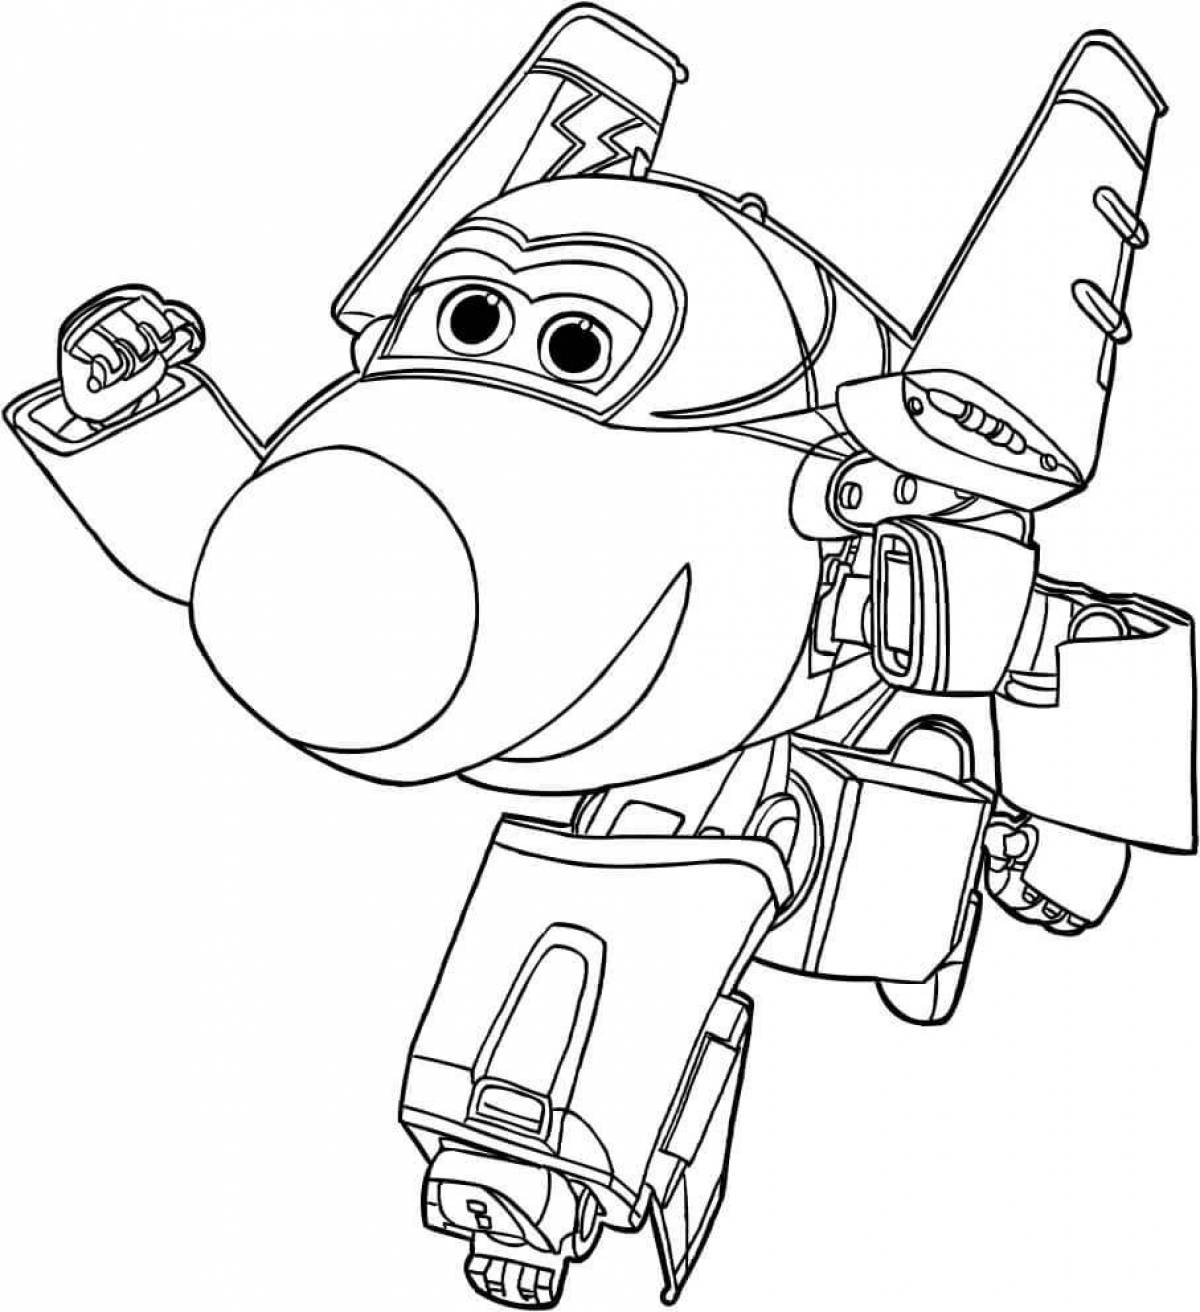 Coloring playful donnie super wings